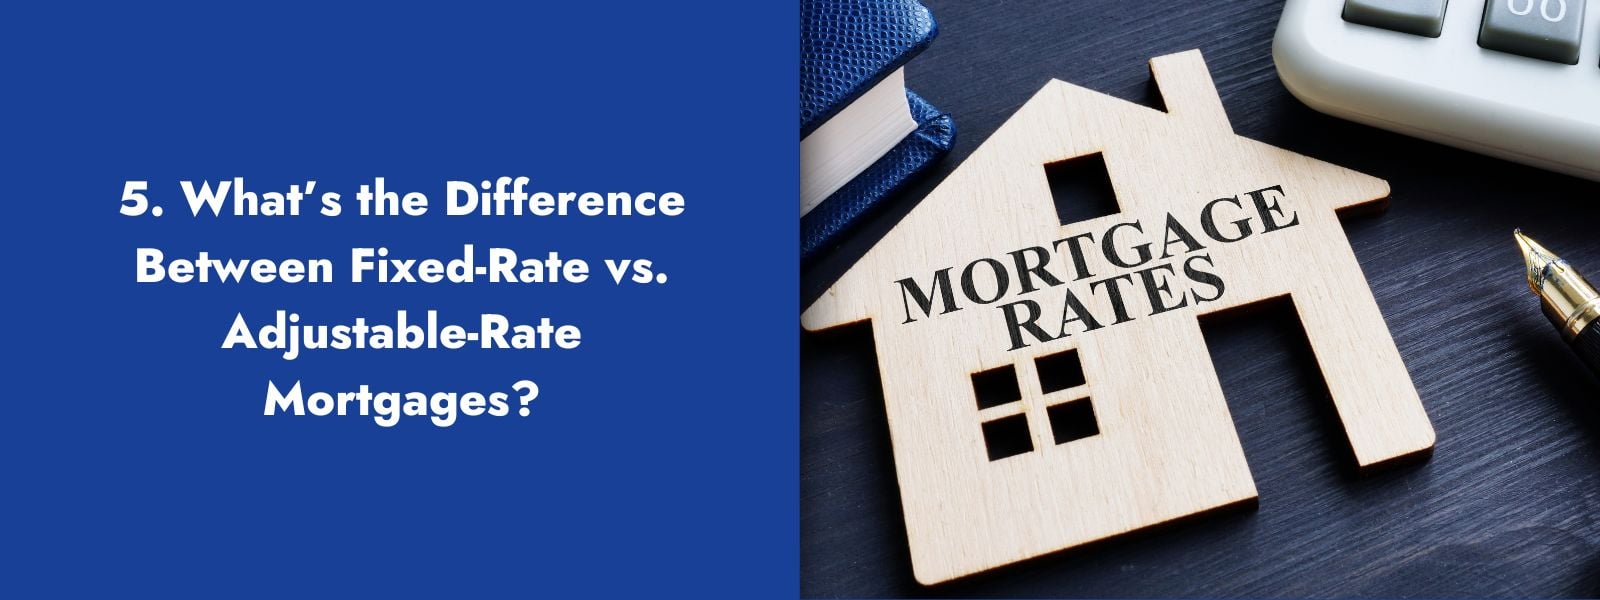 5. What’s the Difference Between Fixed-Rate vs. Adjustable-Rate Mortgages